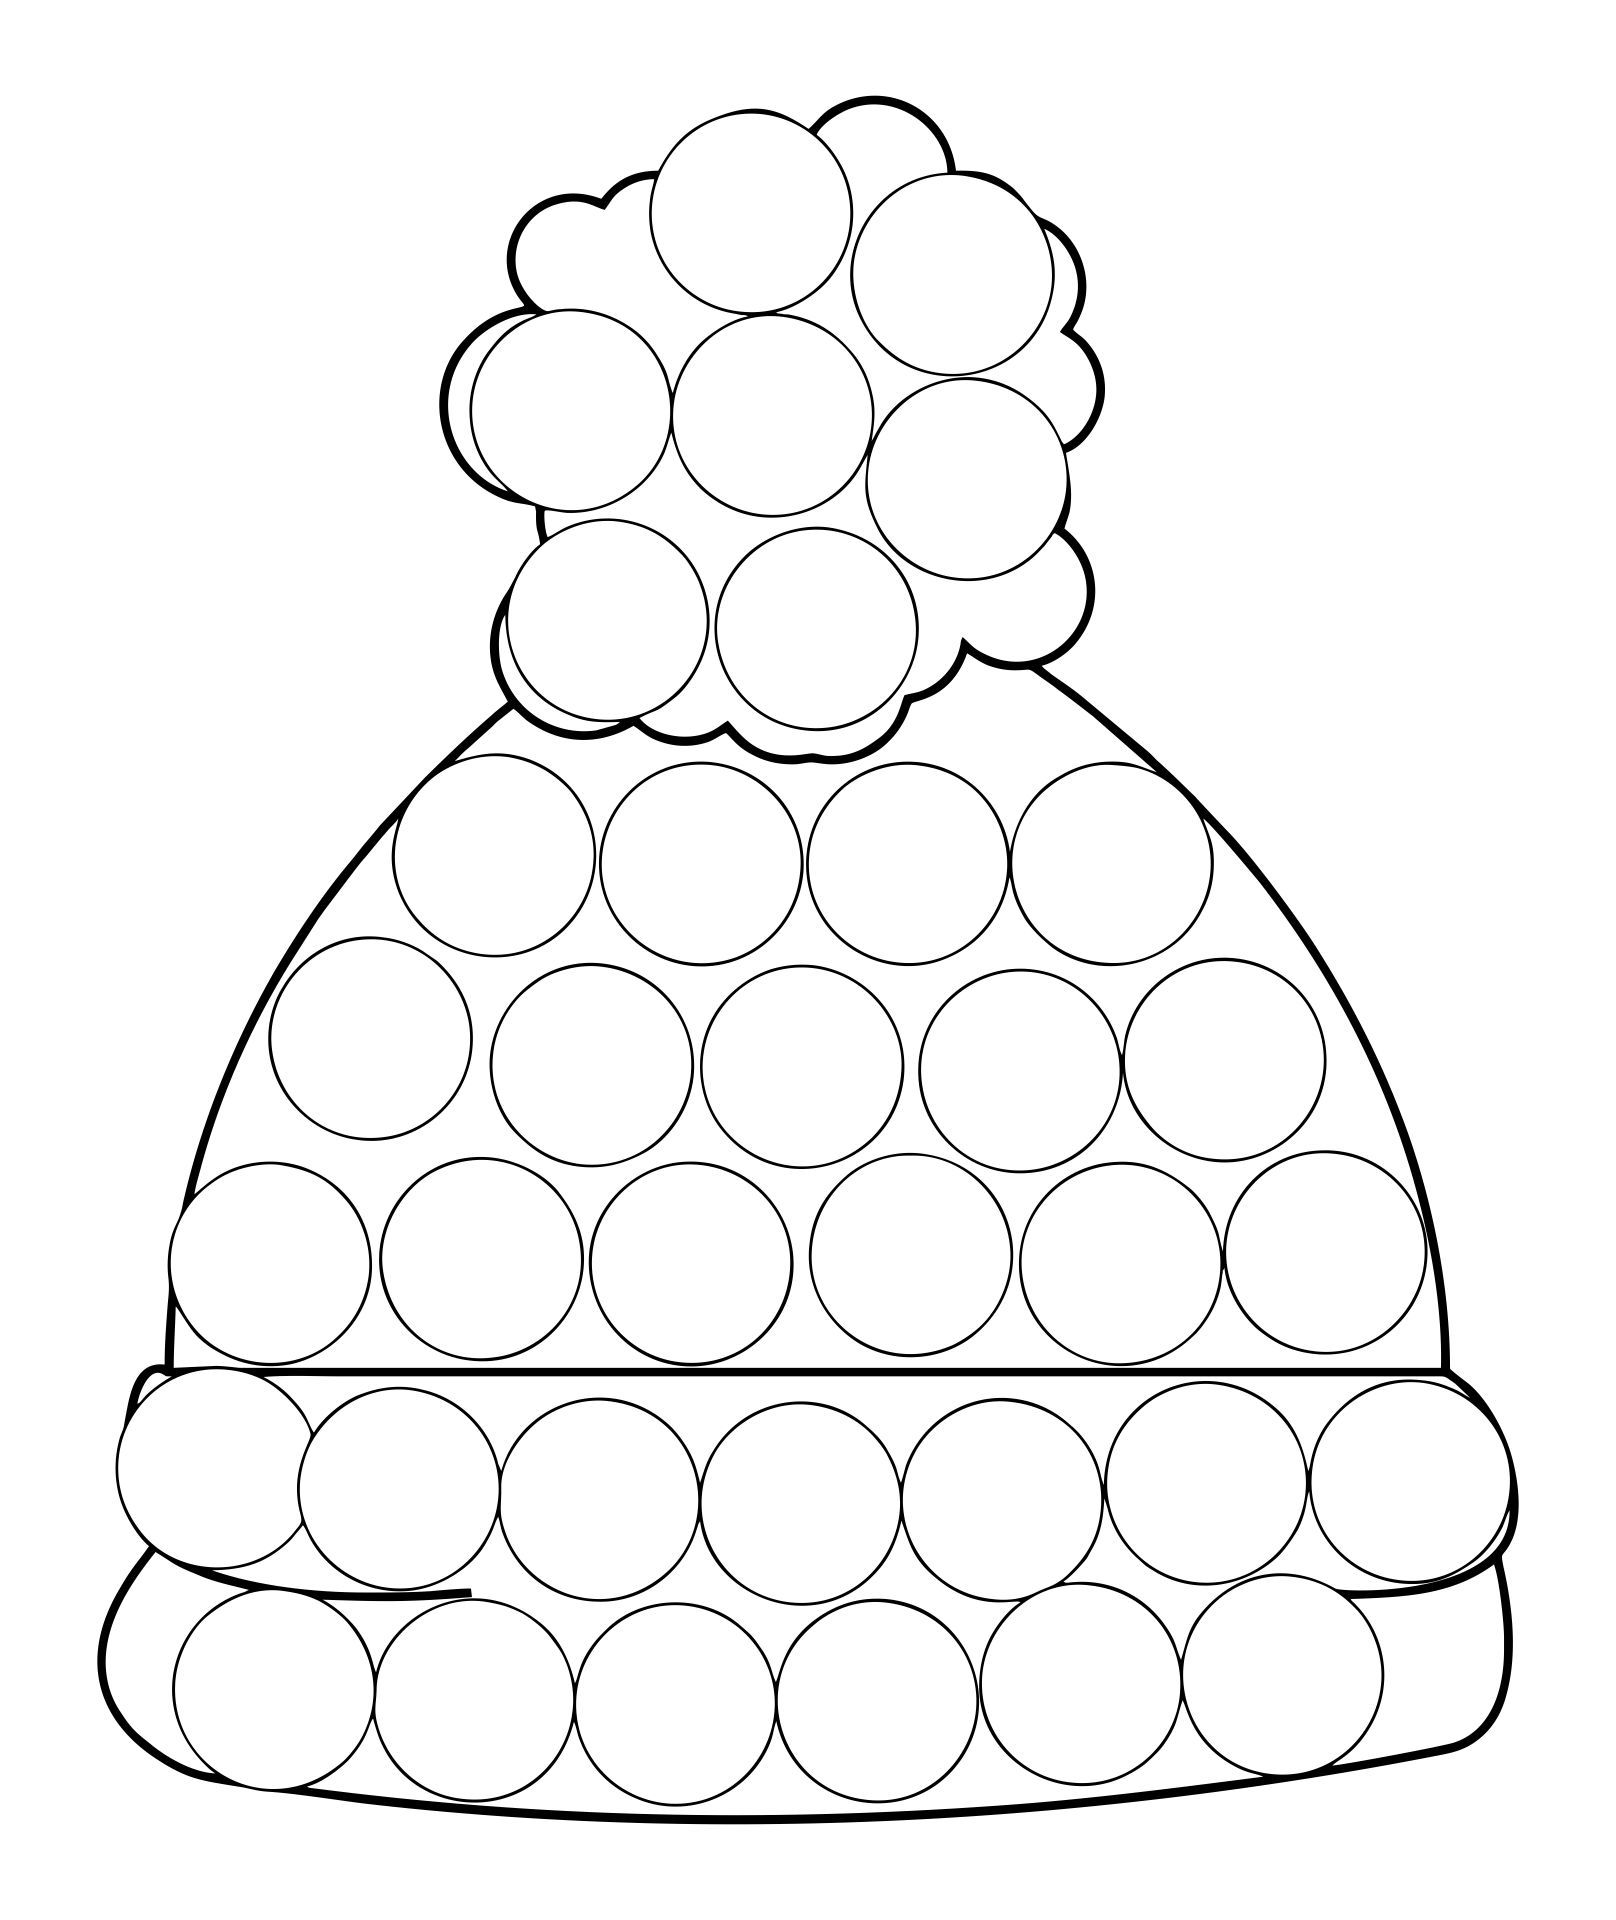 Dot marker coloring pages do a dot free printable art dots art